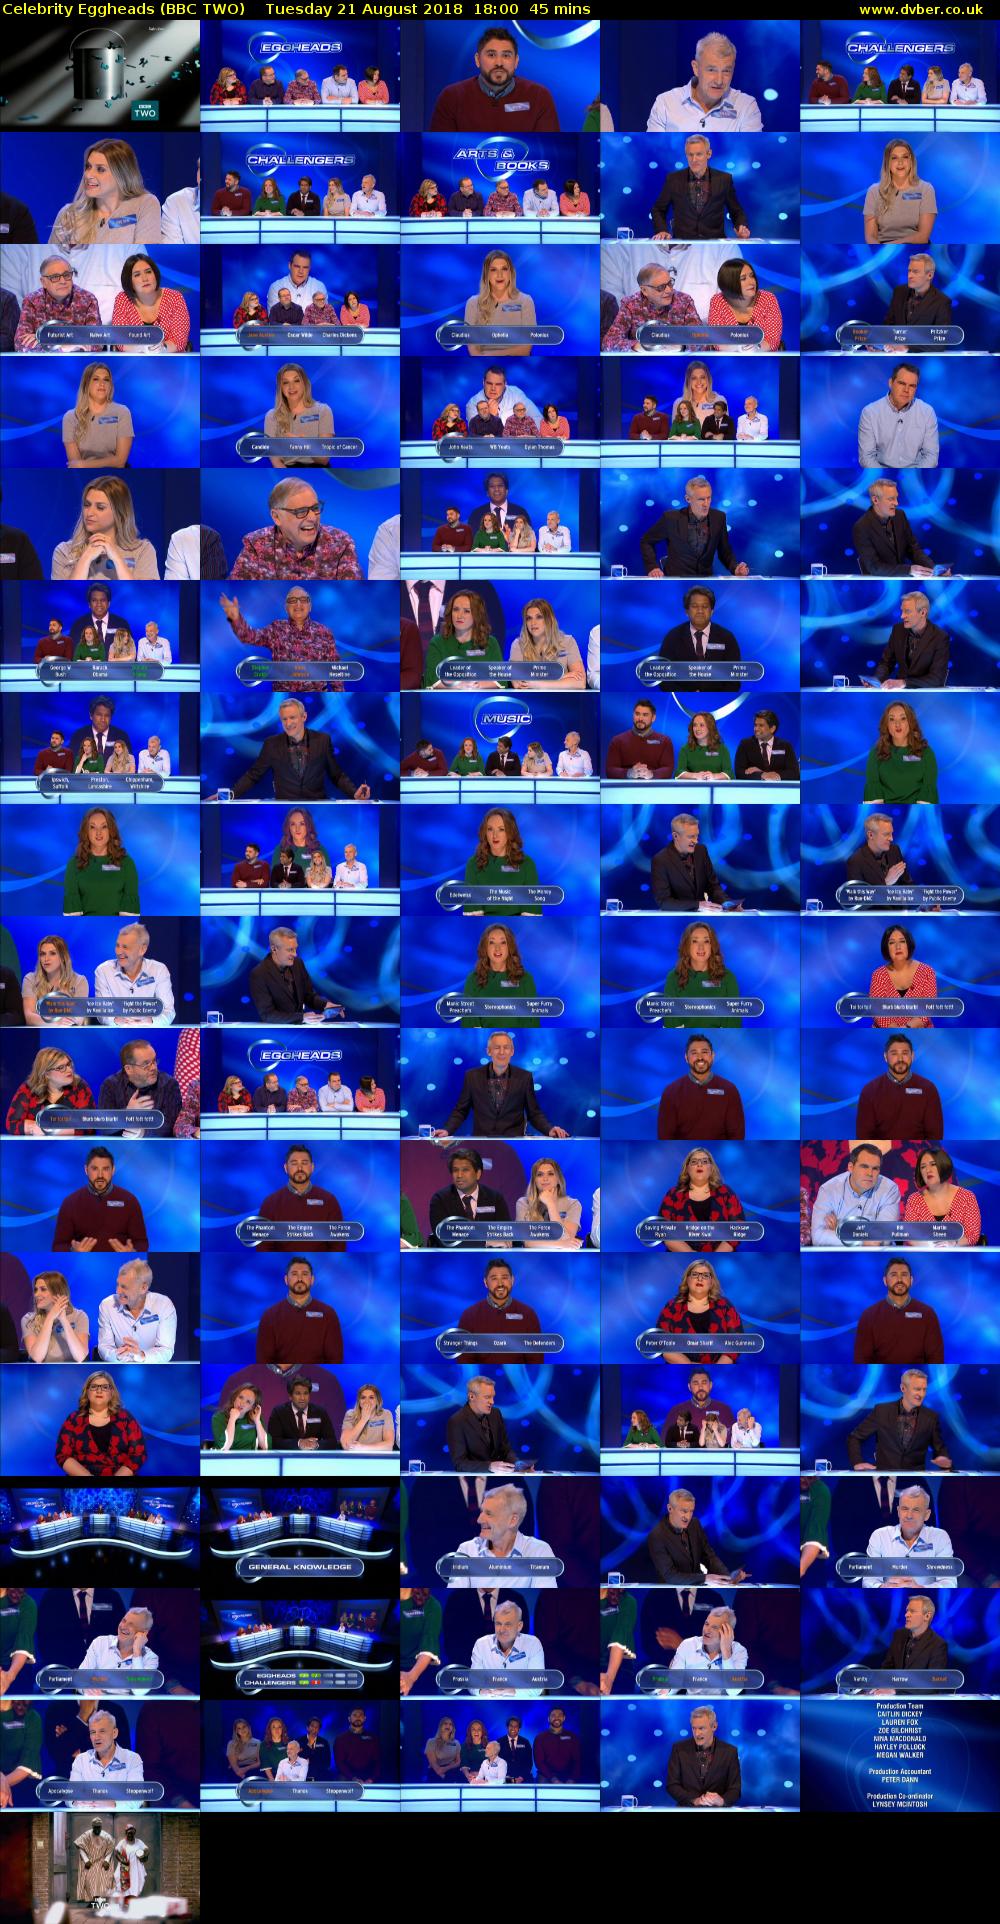 Celebrity Eggheads (BBC TWO) Tuesday 21 August 2018 18:00 - 18:45